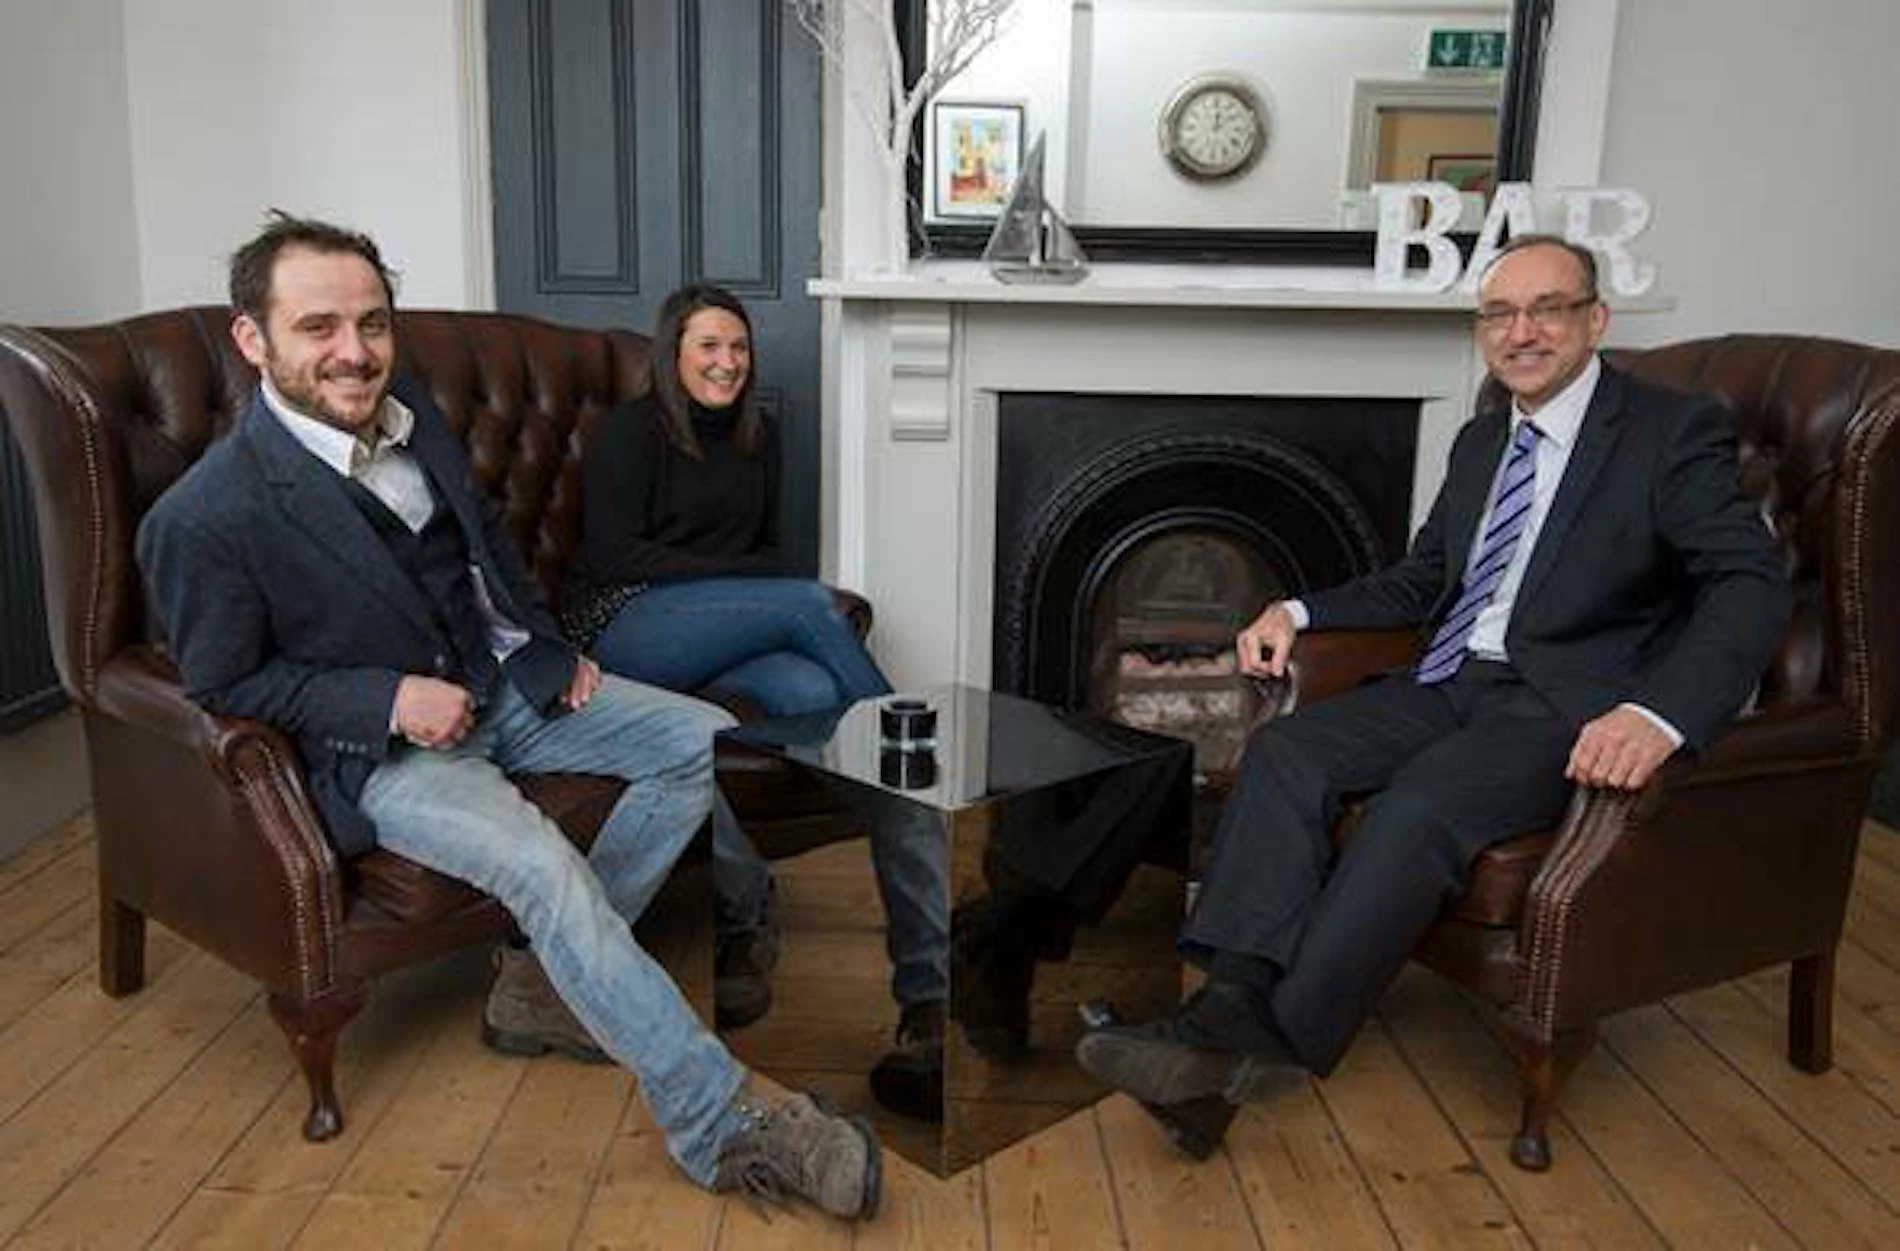 Andrew and Mica Wyatt with HSBC’s Martin Goodall at The Chapel House Hotel & Restaurant.